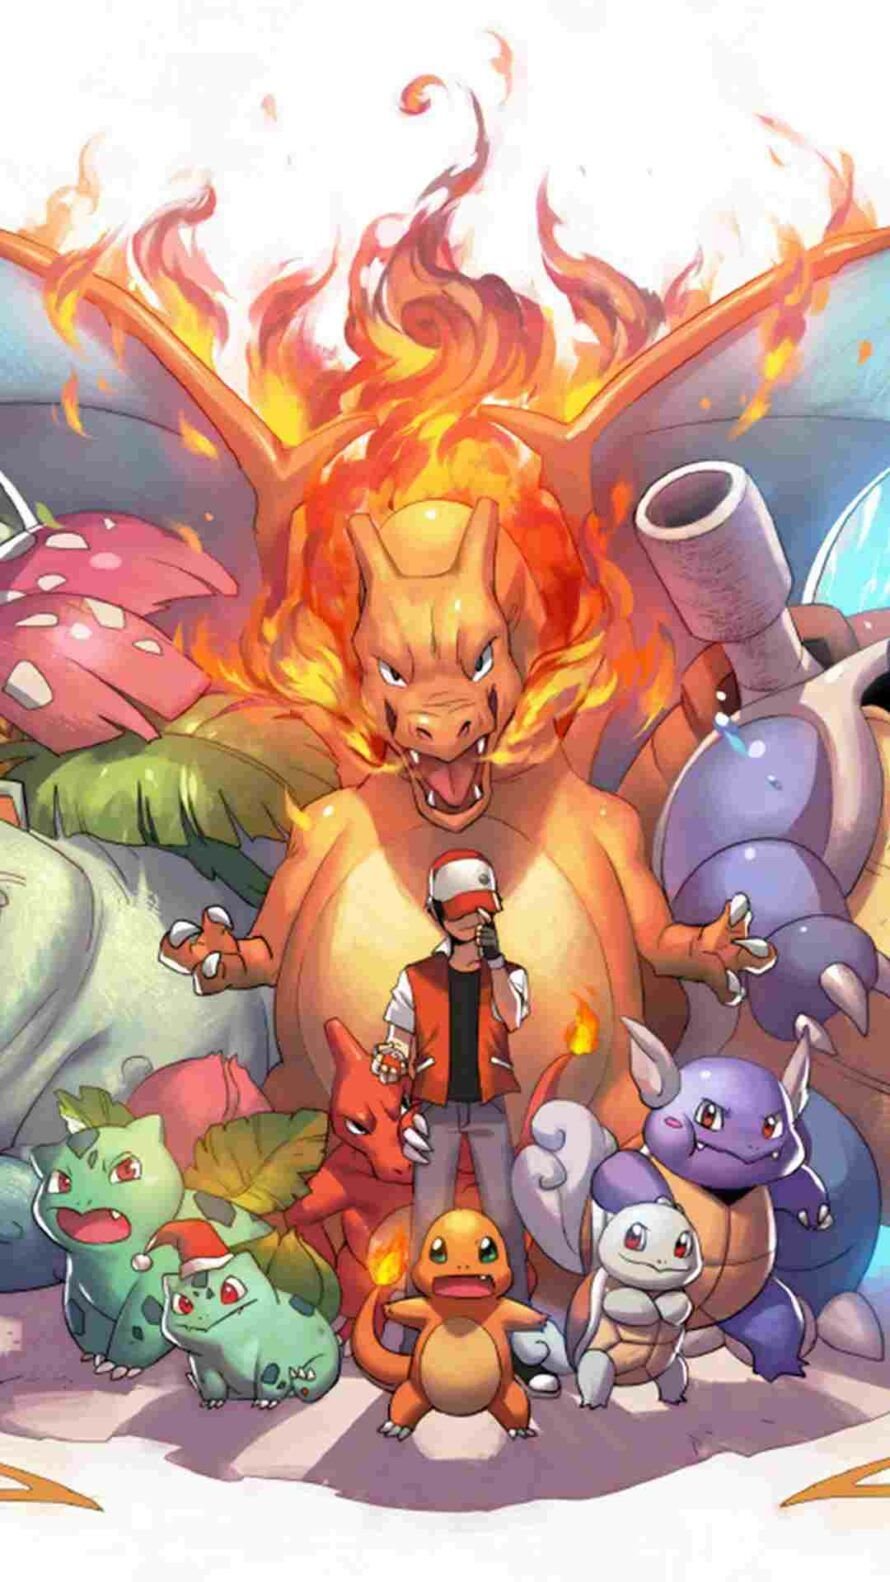 Who do you think is Ash's strongest Pokemon (besides Pikachu), his Charizard  or Greninja? - Quora